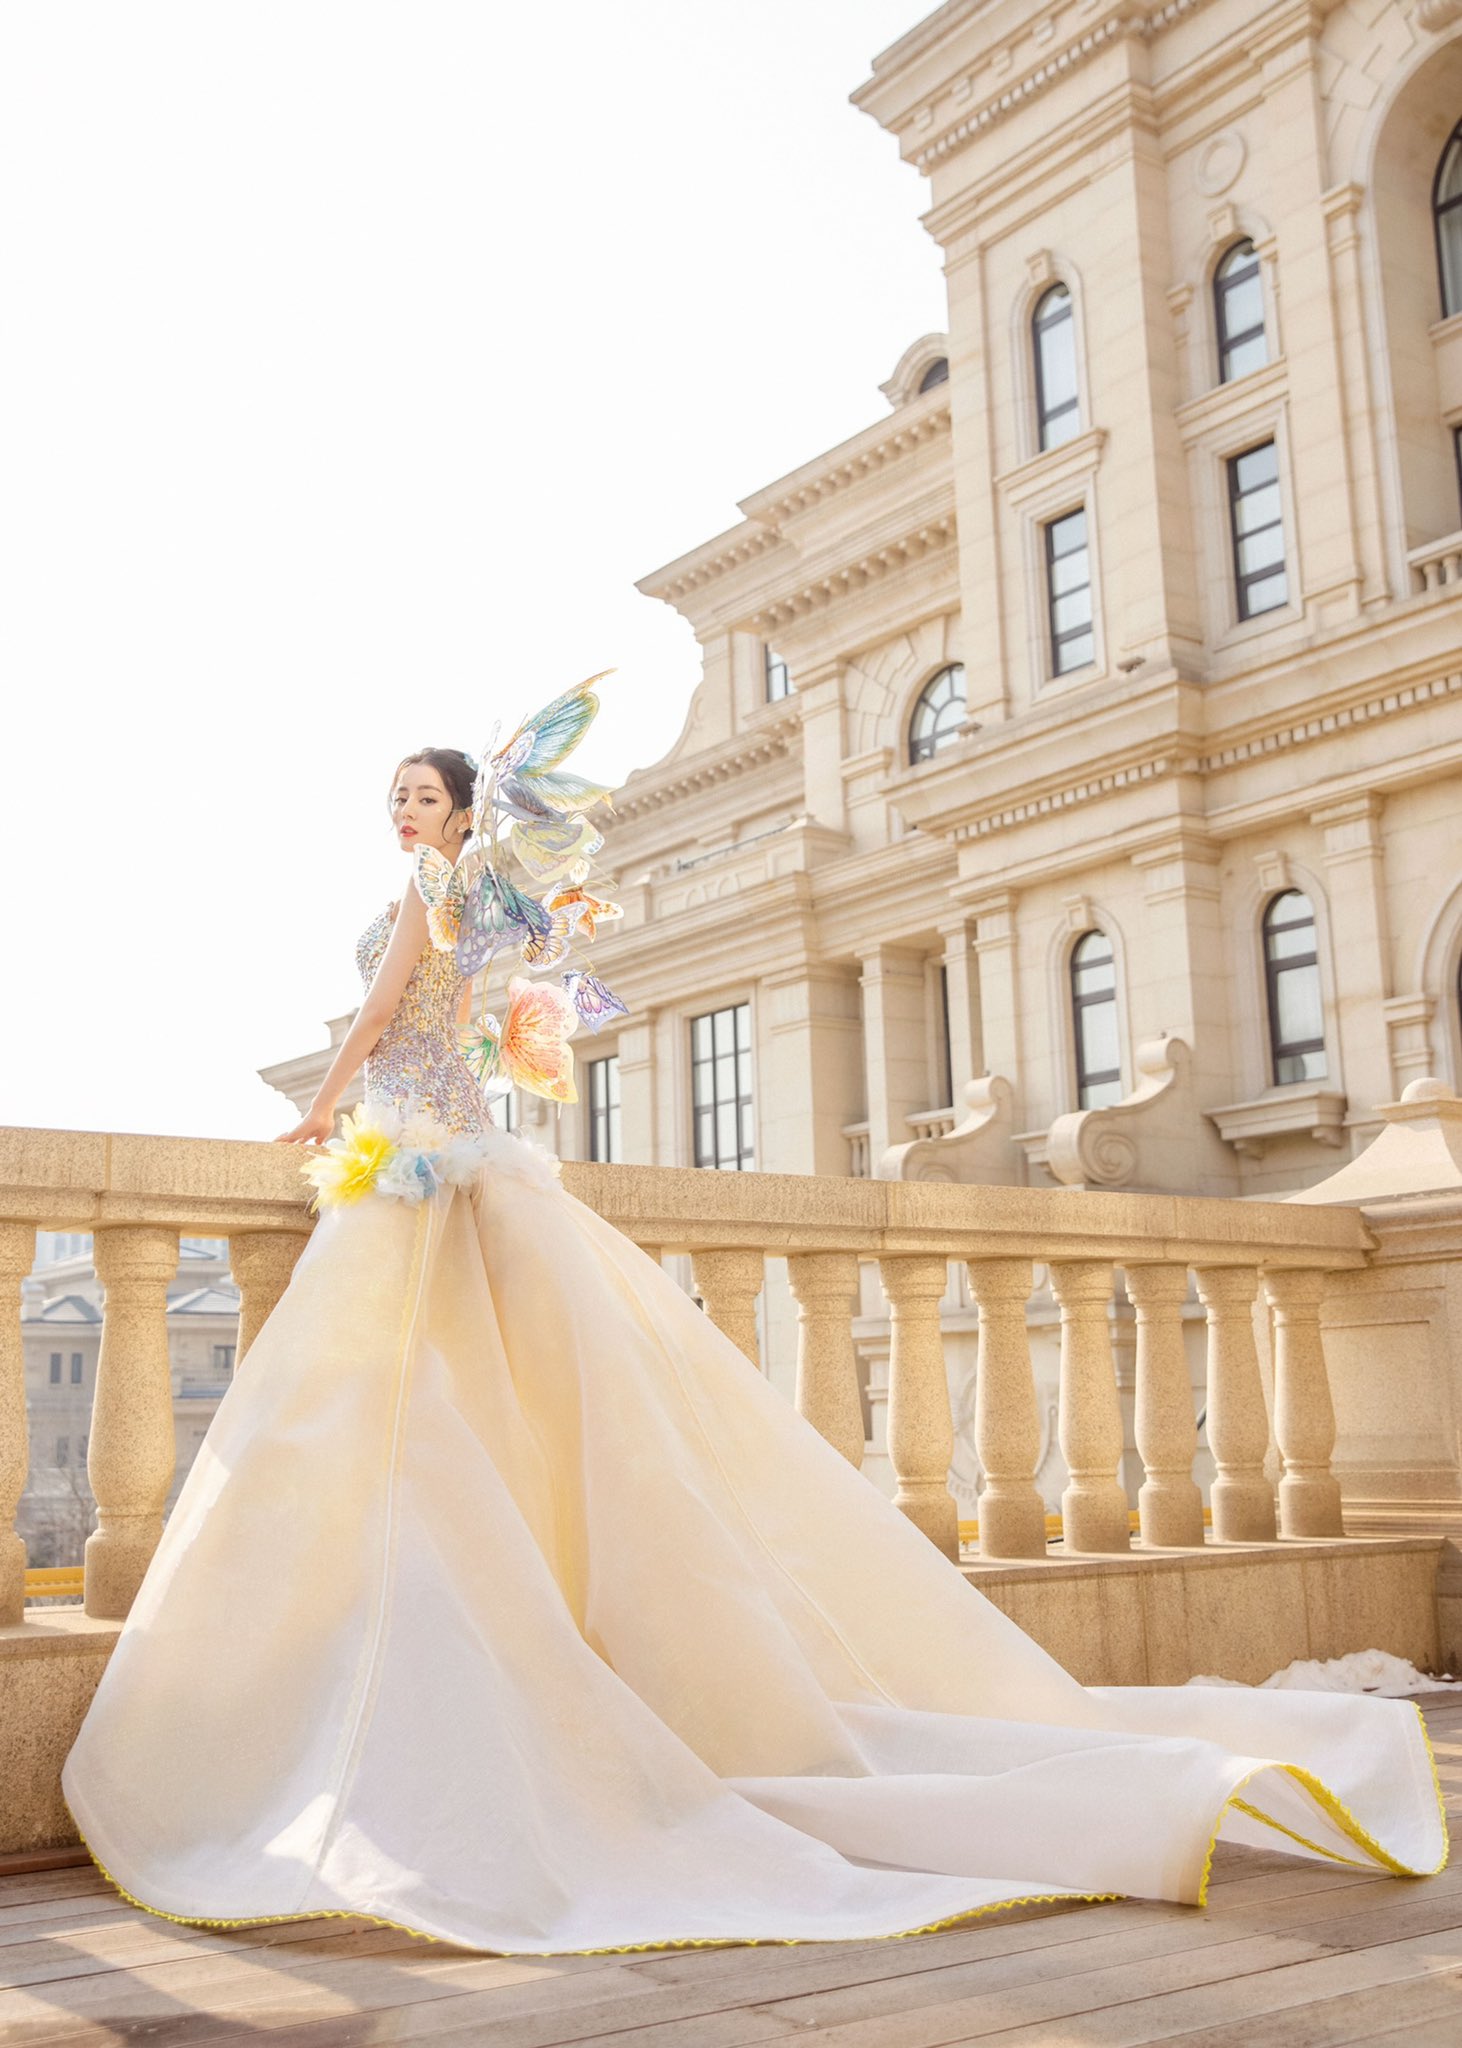 Comparing Cbiz's beauty in angelic cosplay: Angela Baby was surprised, but only after Heat Ba did she turn her head - Photo 6.